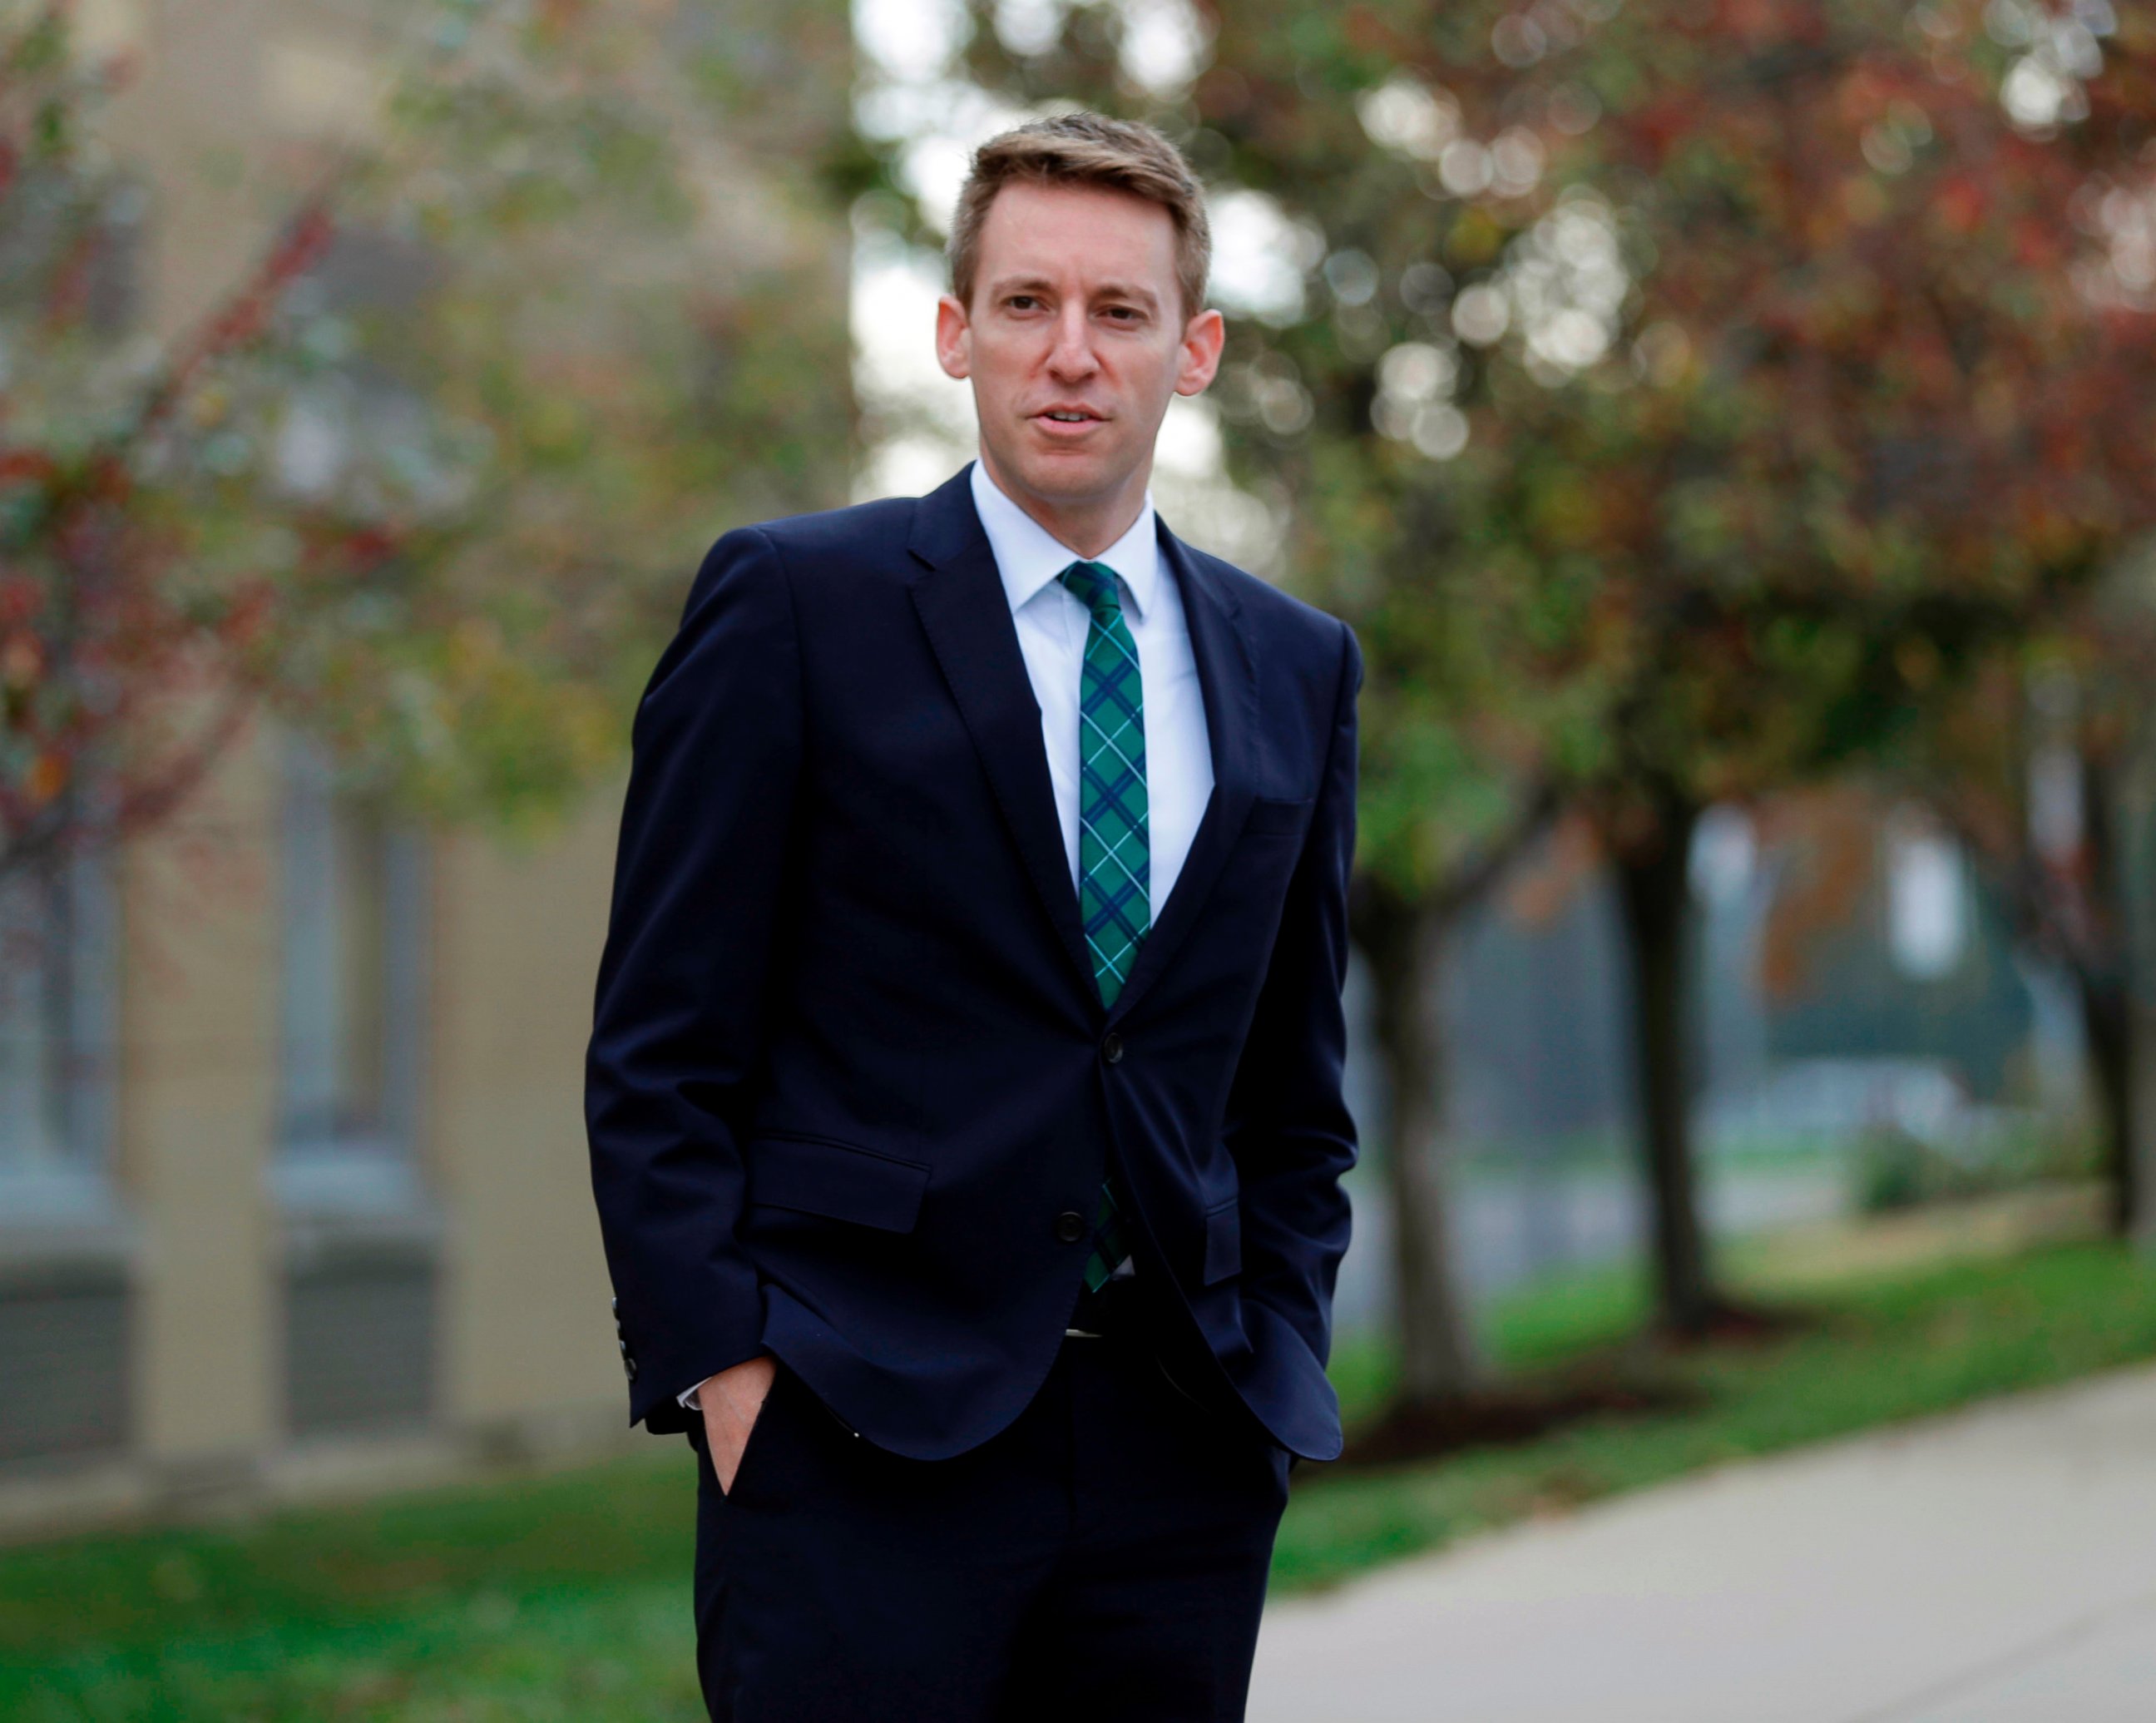 PHOTO: In this Nov. 8, 2016 file photo, Democratic U.S. Senate candidate Jason Kander waits to greet voters outside a polling place in St. Louis. Kander’s “Outside the Wire: Ten Lessons I've Learned in Everyday Courage” is coming out Aug. 7.